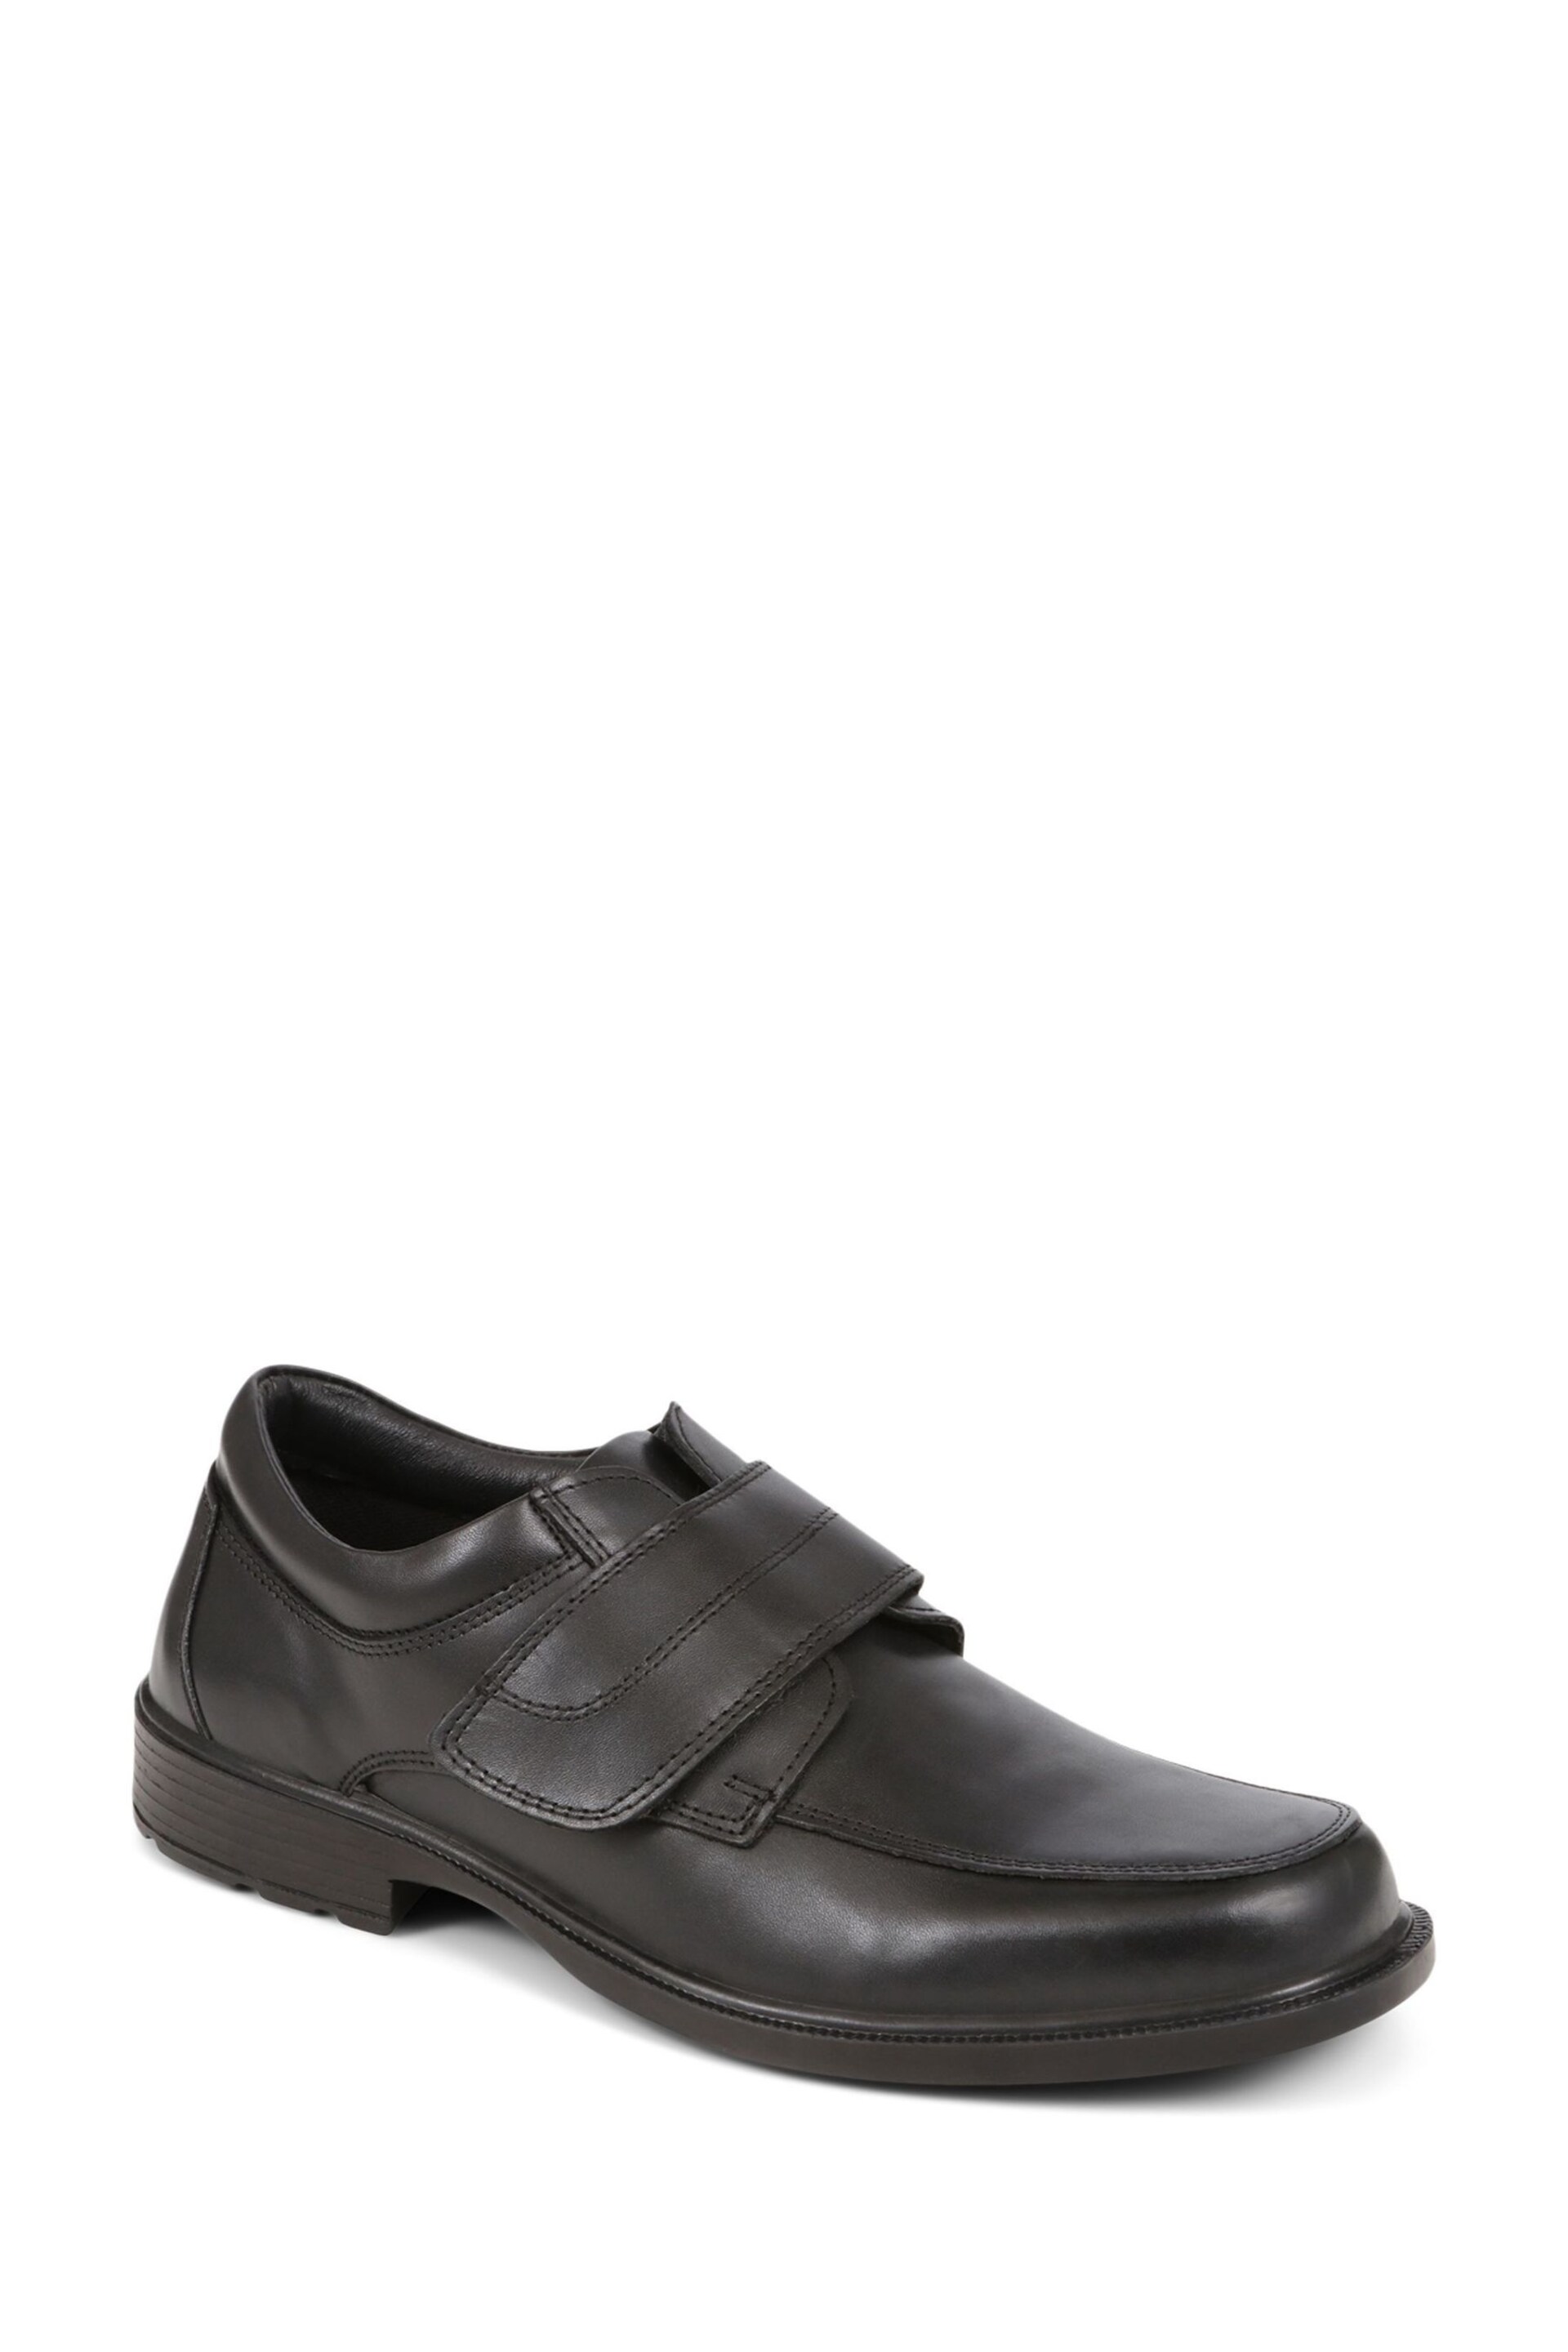 Pavers Leather Touch Fasten Black Shoes - Image 1 of 5